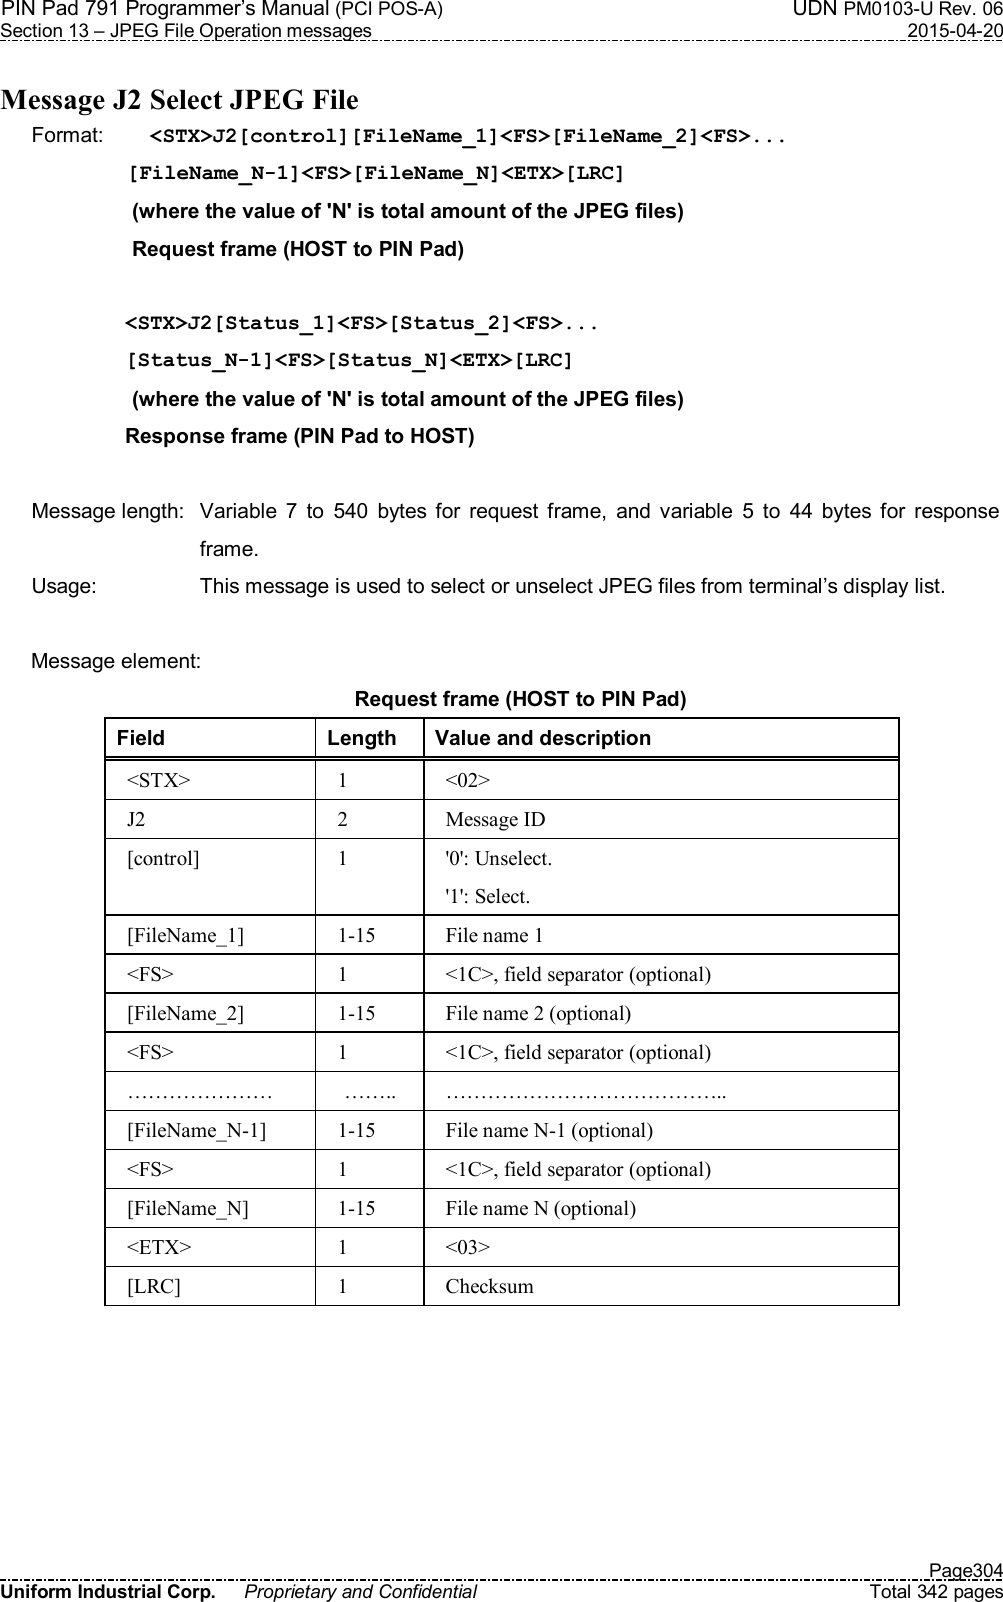 PIN Pad 791 Programmer’s Manual (PCI POS-A)  UDN PM0103-U Rev. 06 Section 13 – JPEG File Operation messages  2015-04-20   Page304 Uniform Industrial Corp.  Proprietary and Confidential  Total 342 pages  Message J2 Select JPEG File Format:  &lt;STX&gt;J2[control][FileName_1]&lt;FS&gt;[FileName_2]&lt;FS&gt;... [FileName_N-1]&lt;FS&gt;[FileName_N]&lt;ETX&gt;[LRC] (where the value of &apos;N&apos; is total amount of the JPEG files) Request frame (HOST to PIN Pad)  &lt;STX&gt;J2[Status_1]&lt;FS&gt;[Status_2]&lt;FS&gt;... [Status_N-1]&lt;FS&gt;[Status_N]&lt;ETX&gt;[LRC] (where the value of &apos;N&apos; is total amount of the JPEG files) Response frame (PIN Pad to HOST)  Message length:  Variable  7  to  540  bytes  for  request  frame,  and  variable  5  to  44  bytes  for  response frame. Usage:  This message is used to select or unselect JPEG files from terminal’s display list.  Message element: Request frame (HOST to PIN Pad) Field  Length  Value and description &lt;STX&gt;  1  &lt;02&gt; J2  2  Message ID [control]  1  &apos;0&apos;: Unselect. &apos;1&apos;: Select. [FileName_1]  1-15  File name 1 &lt;FS&gt;  1  &lt;1C&gt;, field separator (optional) [FileName_2]  1-15  File name 2 (optional) &lt;FS&gt;  1  &lt;1C&gt;, field separator (optional) …………………  ……..  ………………………………….. [FileName_N-1]  1-15  File name N-1 (optional) &lt;FS&gt;  1  &lt;1C&gt;, field separator (optional) [FileName_N]  1-15  File name N (optional) &lt;ETX&gt;  1  &lt;03&gt; [LRC]  1  Checksum  